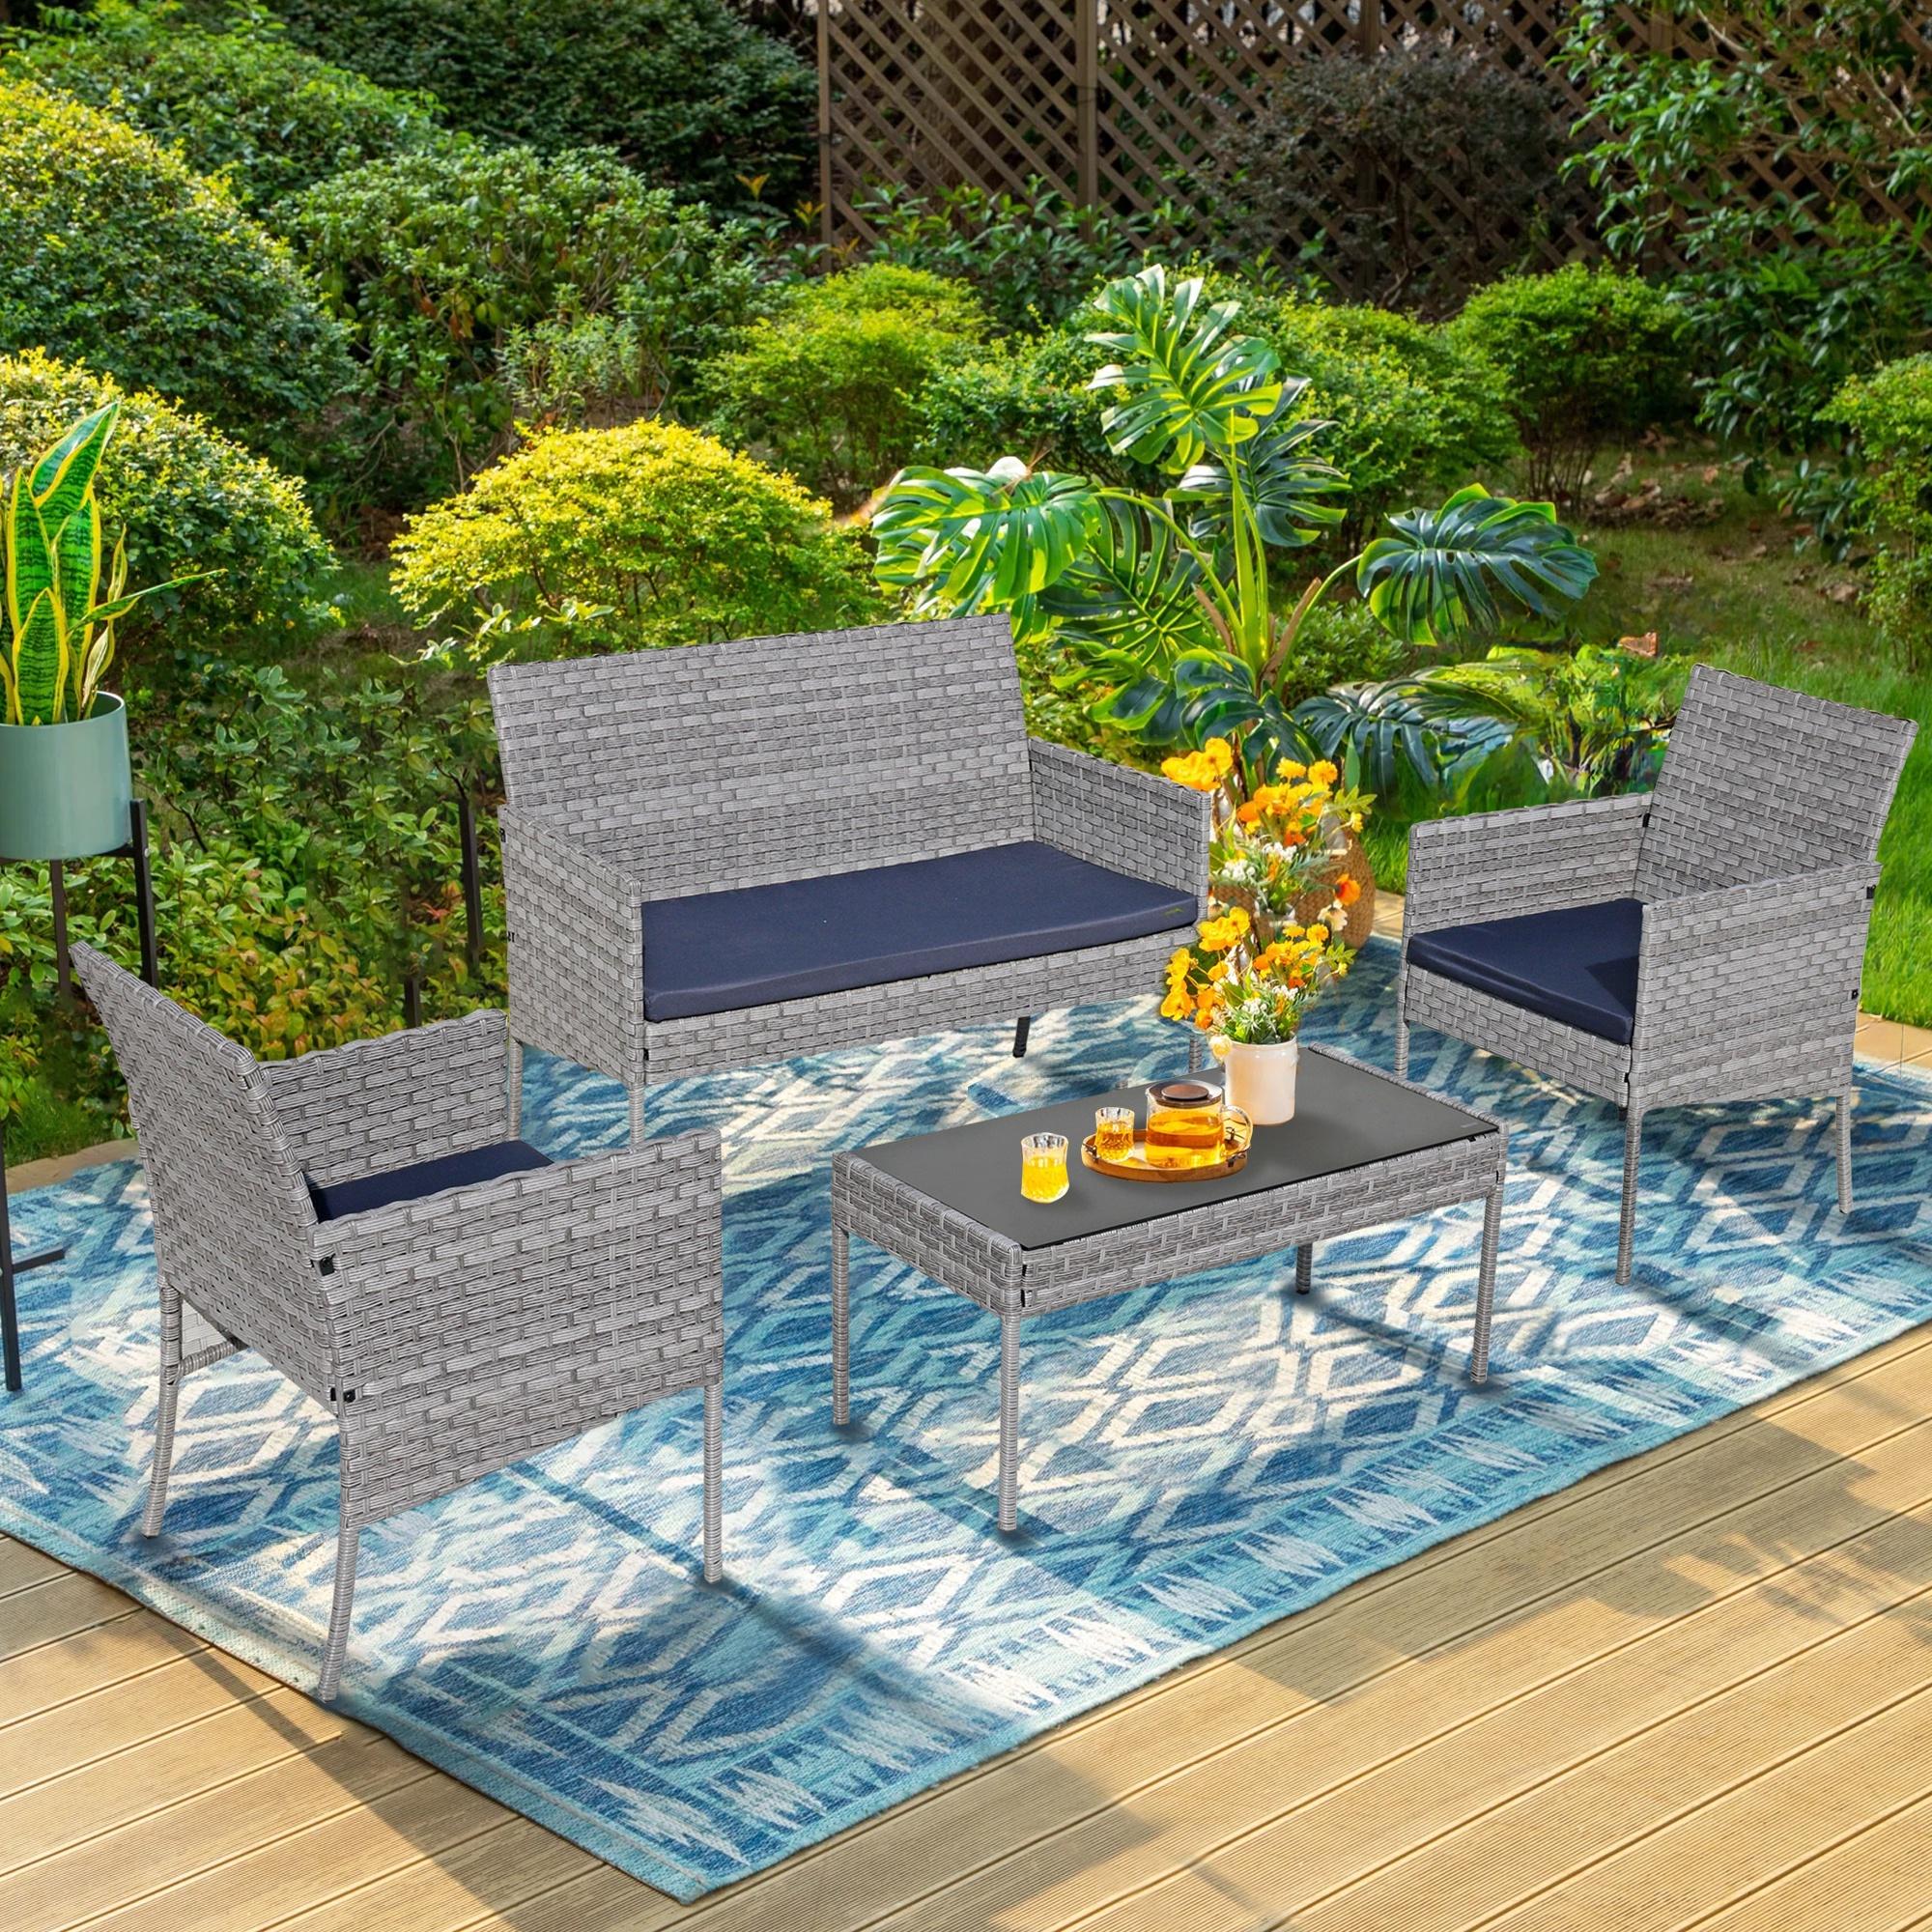 Outdoor Patio Furniture Set, Seizeen 4 Pieces Rattan Conversation Set Cushioned Sofa & Charis, Deck Garden Poolside Furniture Table Set for 4, Gray - image 3 of 11